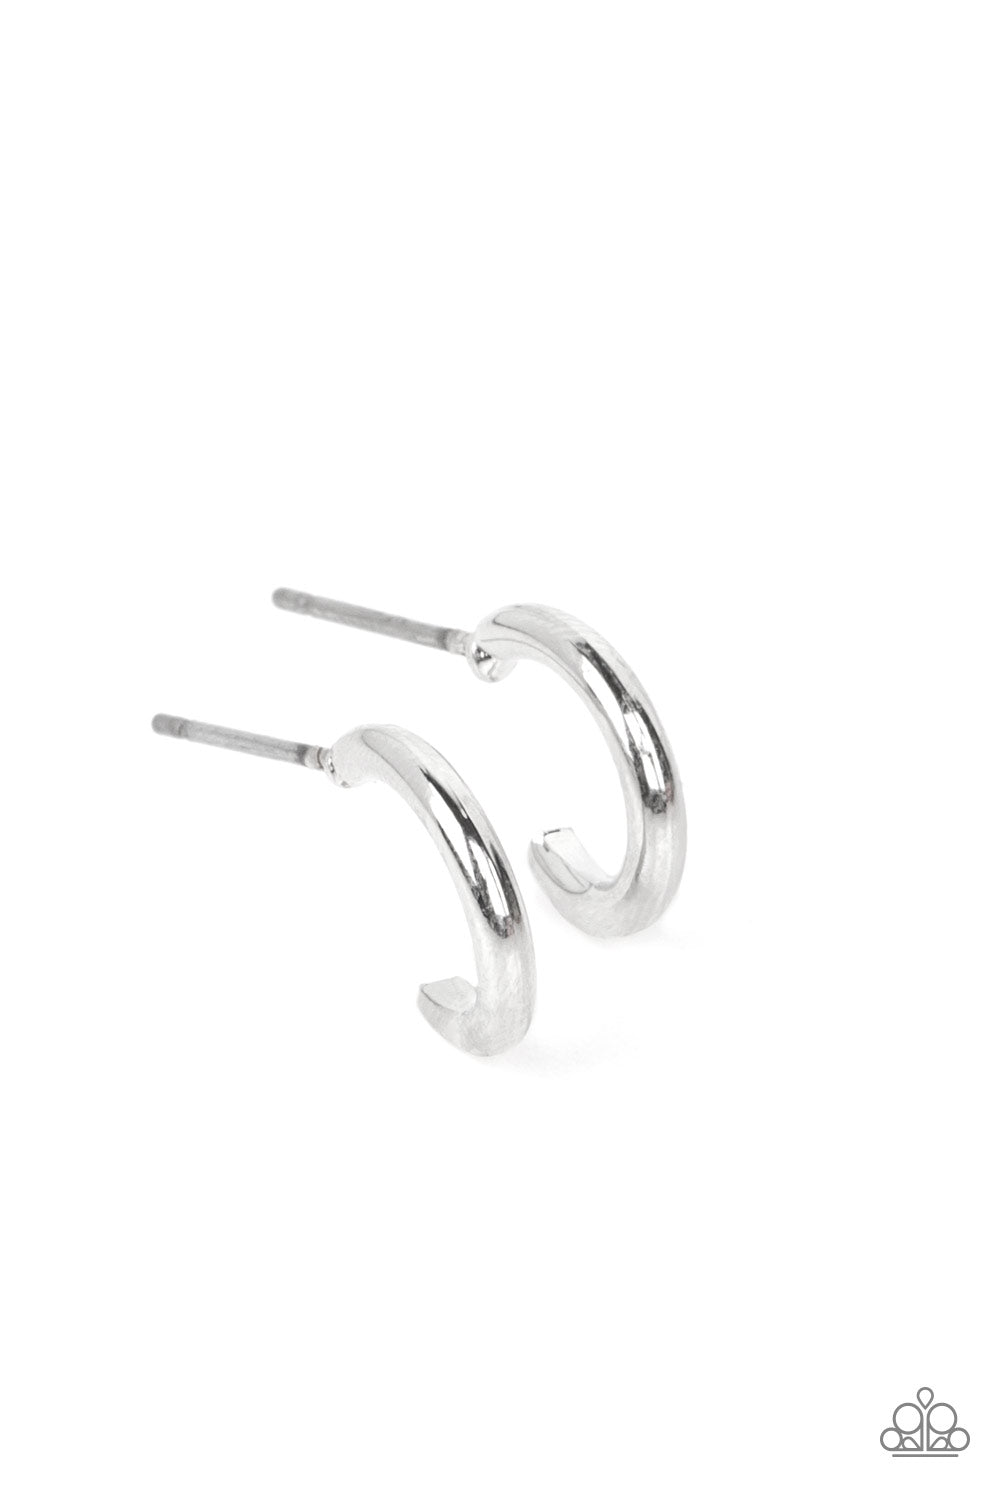 Skip the Small Talk Silver Hoop Earring - Paparazzi Accessories  A shiny silver bar curves into a classic hoop, creating a dainty peek of shimmer. Earring attaches to a standard post fitting. Hoop measures approximately 1/2" in diameter.  Sold as one pair of hoop earrings.